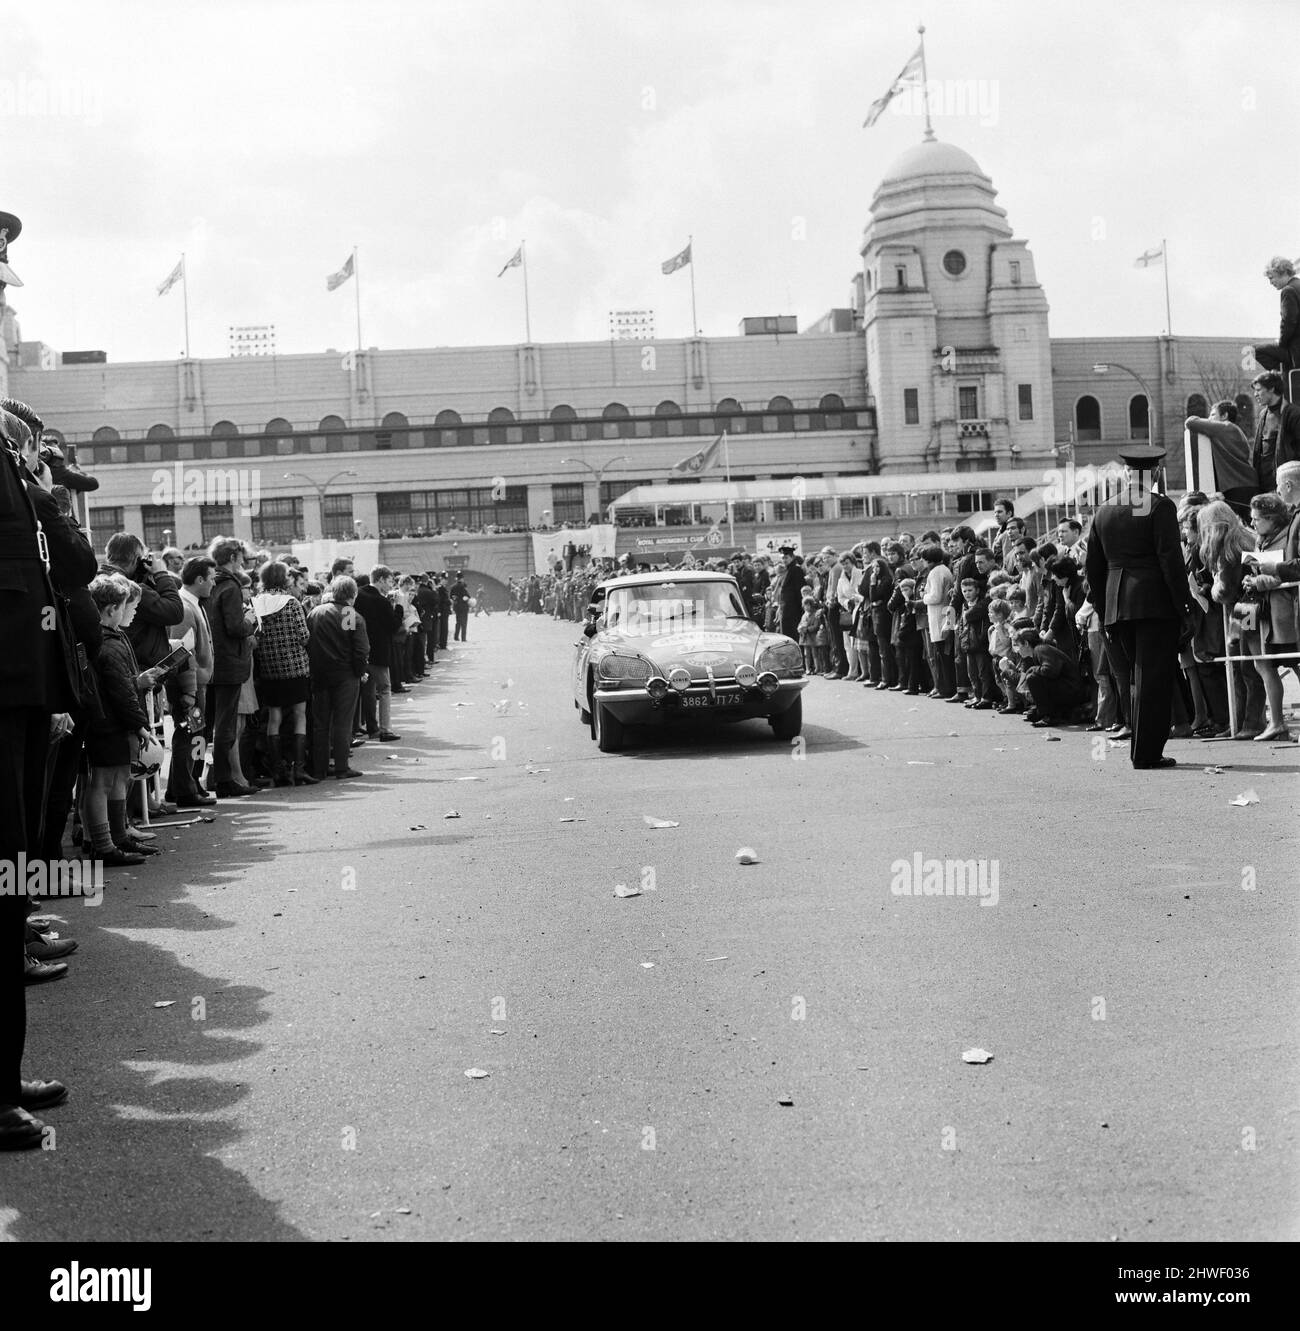 1970 London to Mexico World Cup Rally. The motor rally started at Wembley Stadium in London on 19 April 1970 and finished in Mexico City on 27 May 1970, covering approximately 16,000 miles. Pictured, Start of Race, Wembley Stadium, London, 19th April 1970. Entrant No. 47, PJ Coltelloni (France), driving a Citroen DS 21. Stock Photo